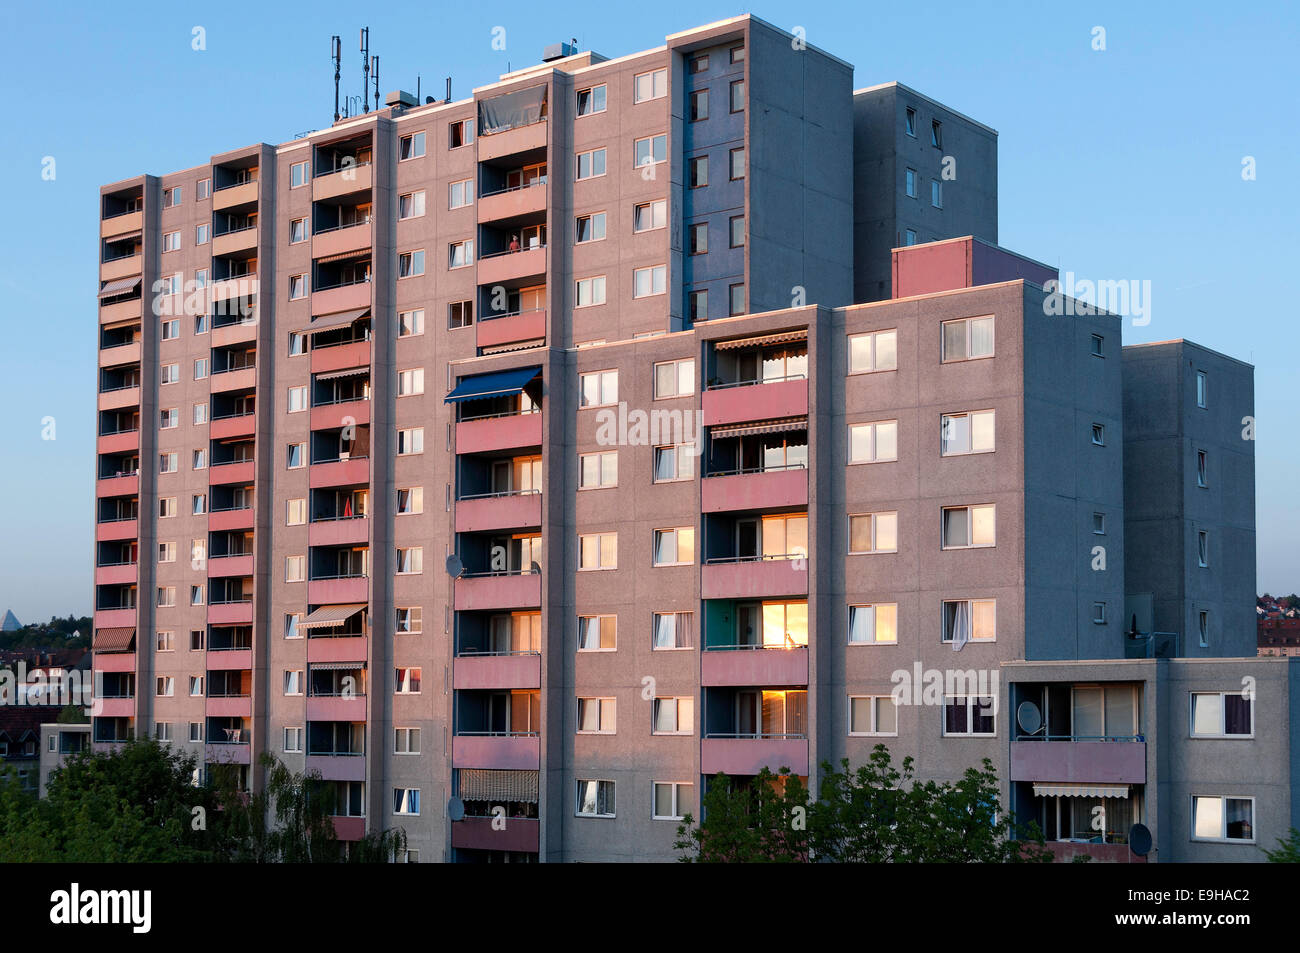 Residential high-rise building, block of flats, Fulda, Hesse, Germany Stock Photo